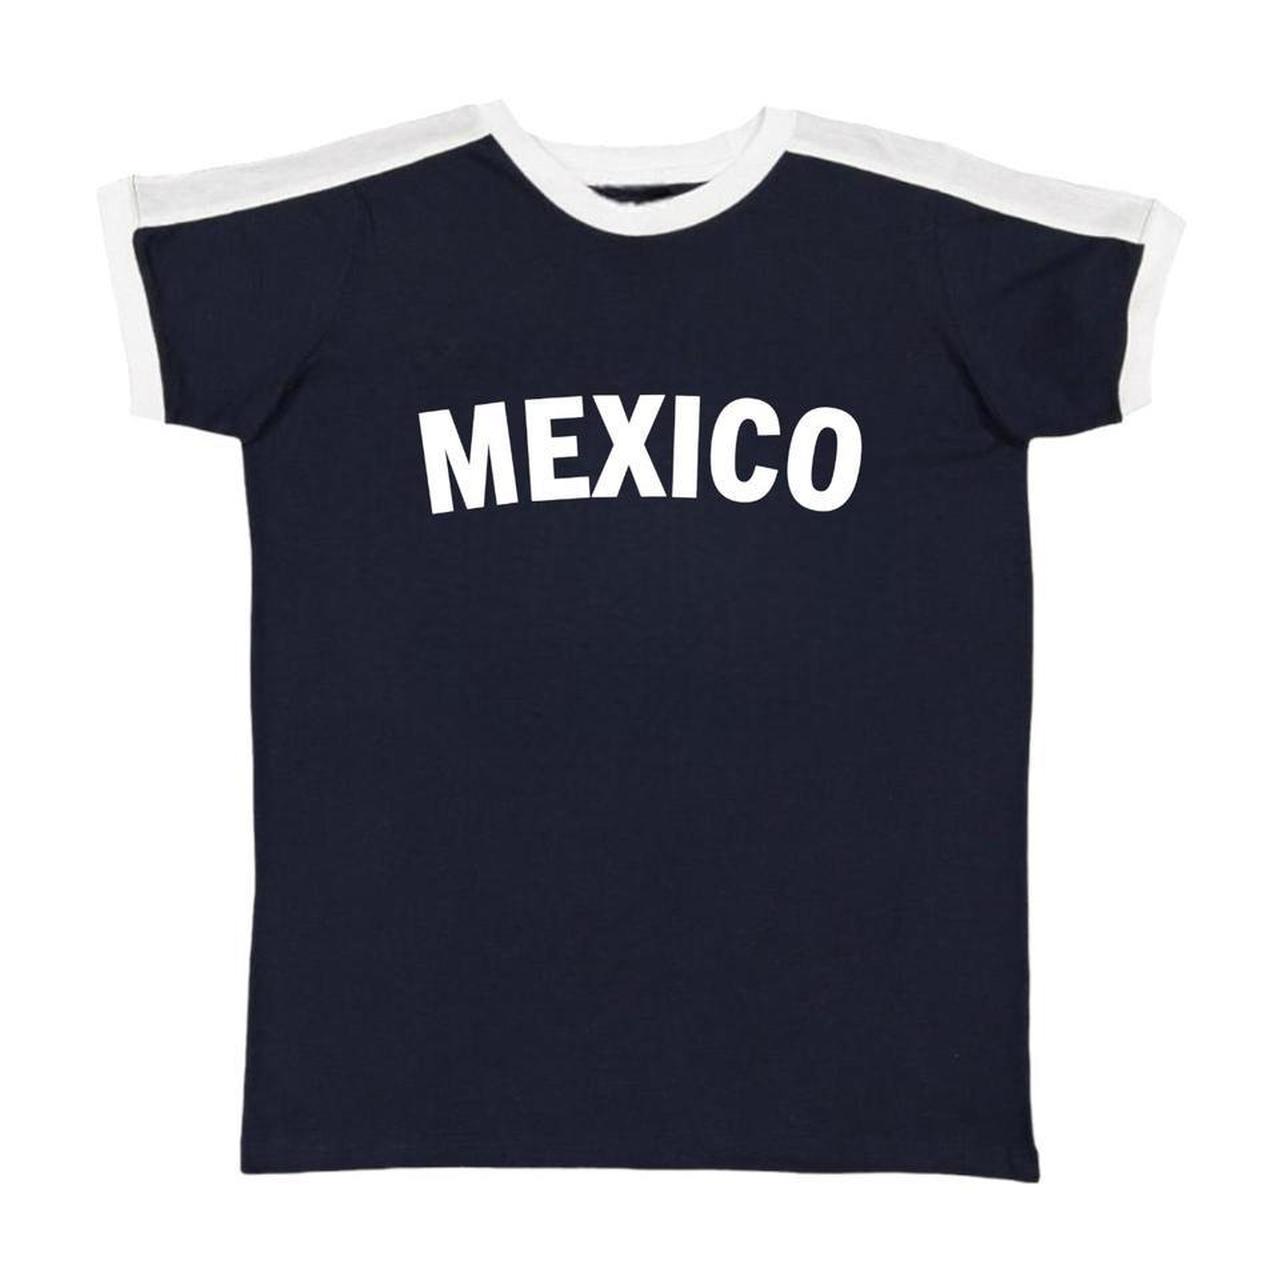 Mexico Jersey Baby Tee , Navy blue ringer t-shirt